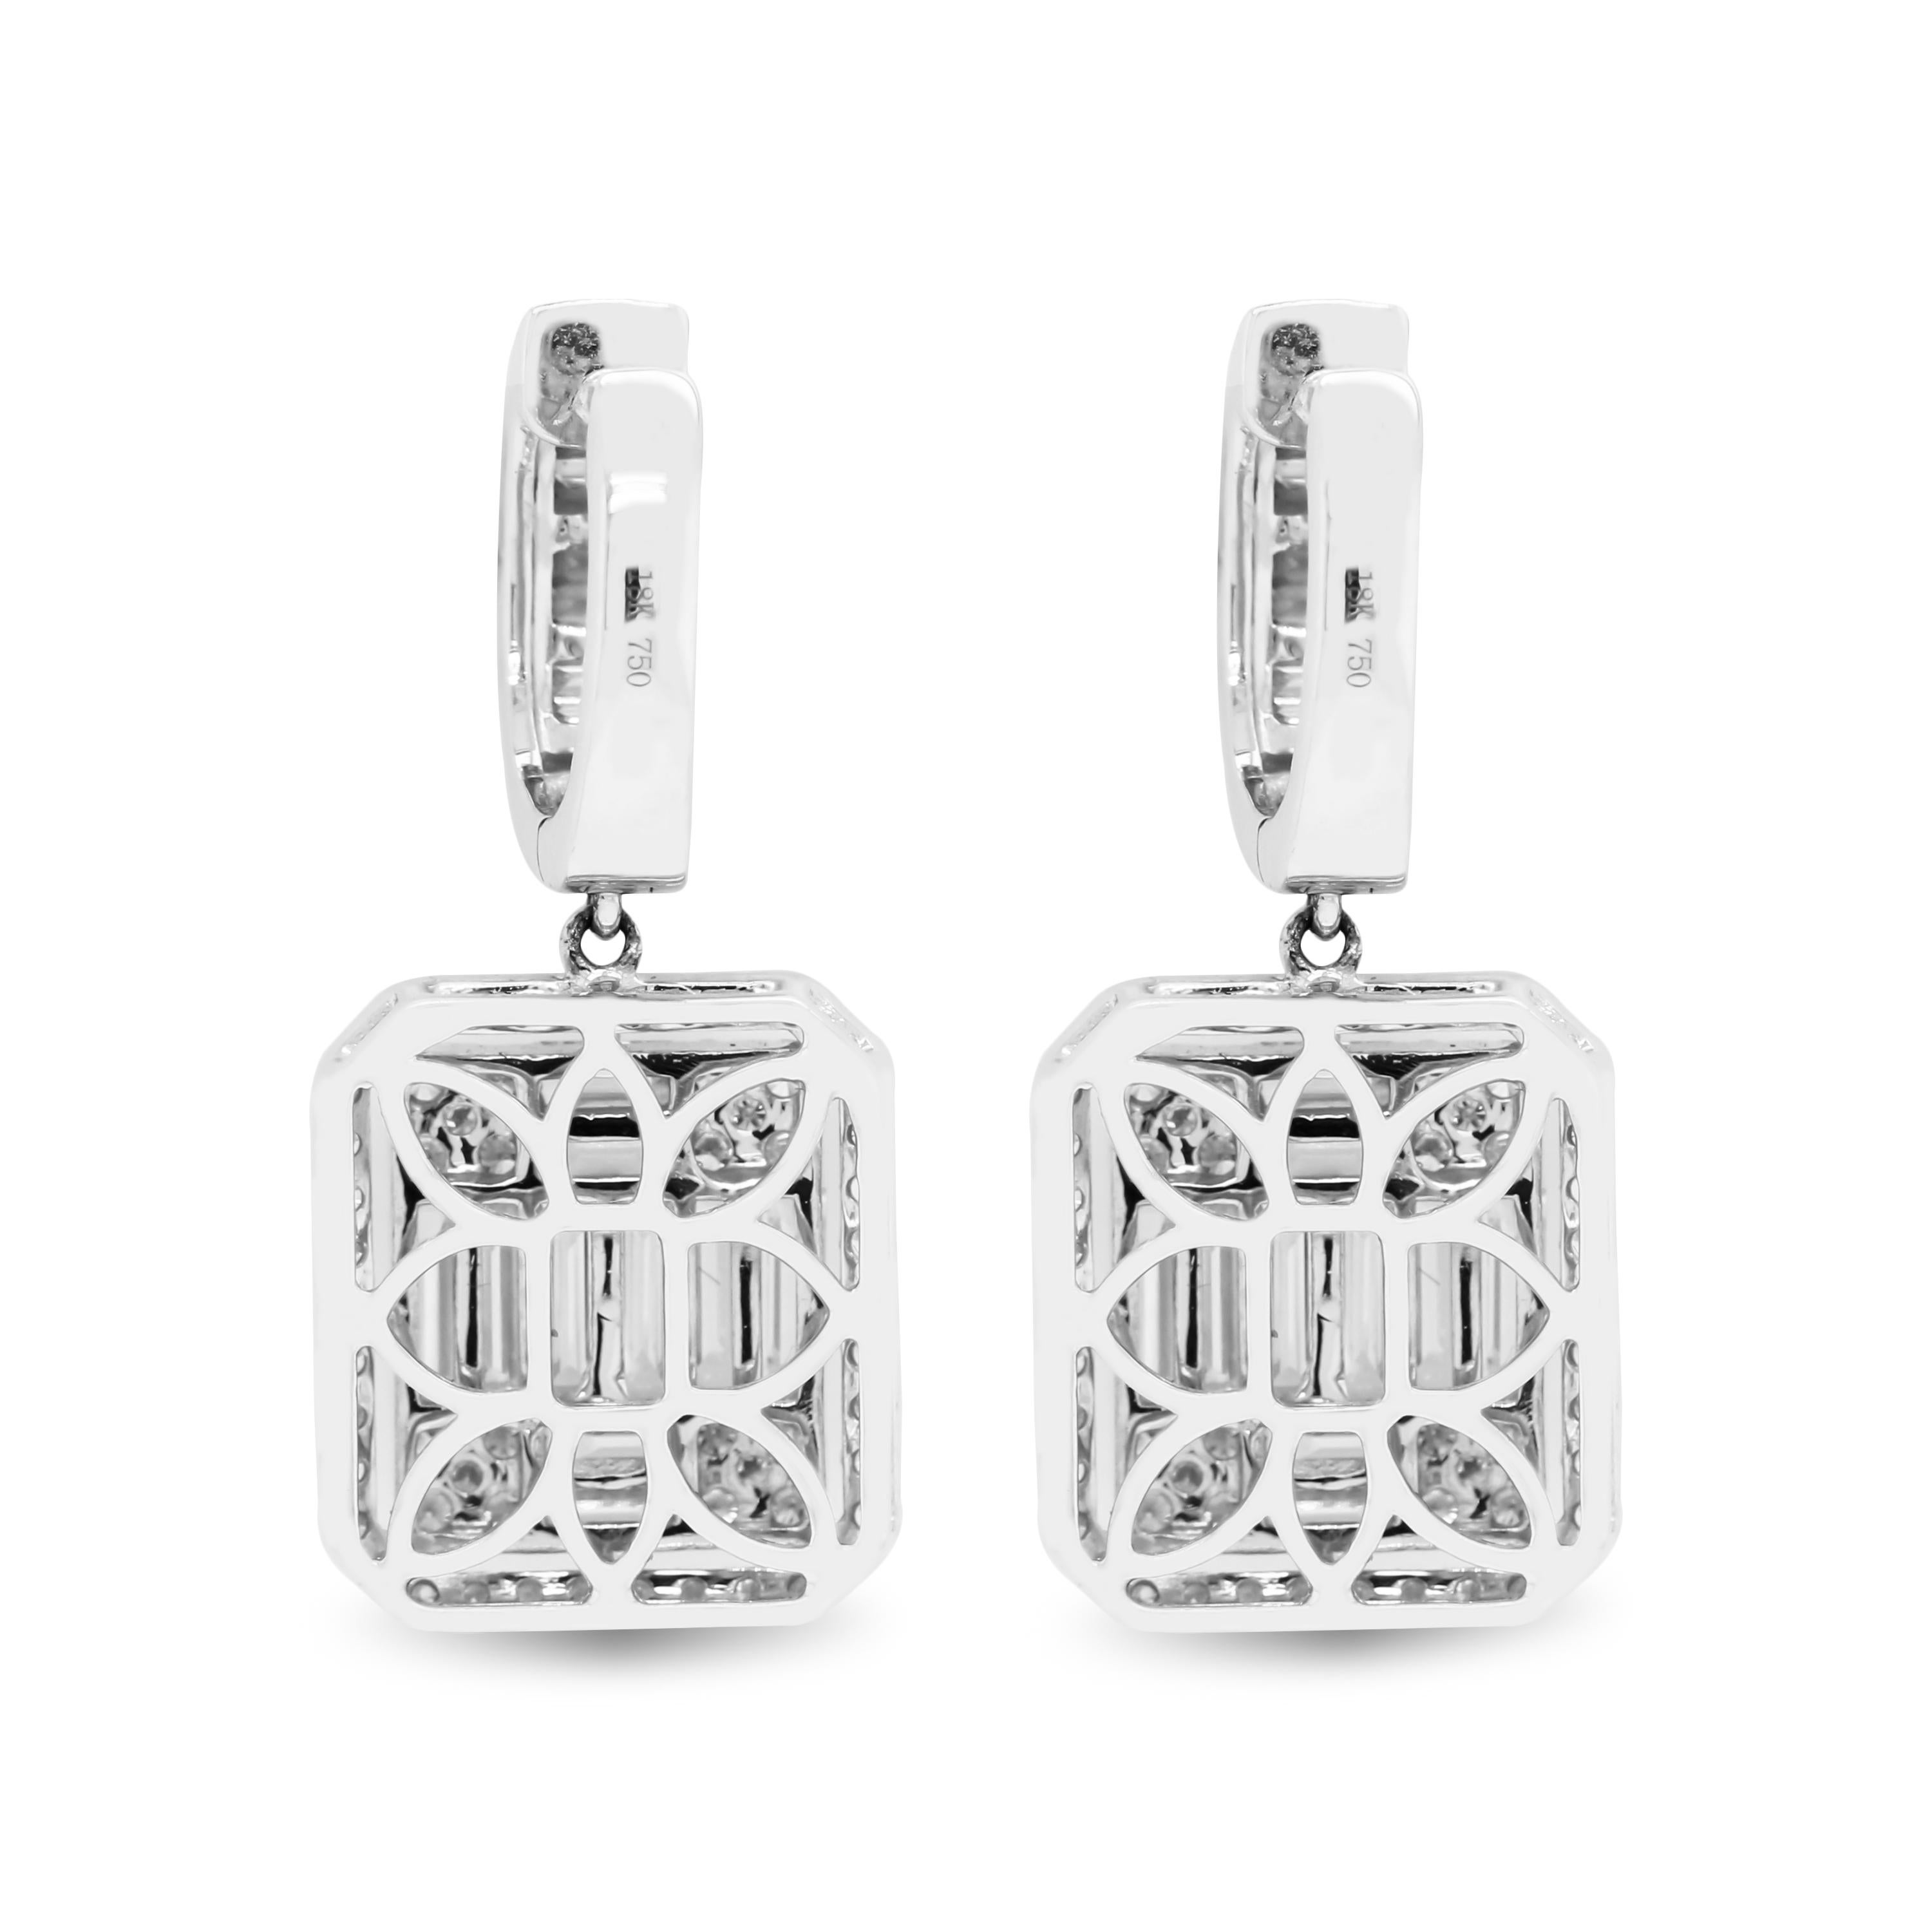 18K White Gold Baguette Round Cut Diamond Drop Dangle Earrings

These earrings are a part of our illusion collection which features baguette and round cut diamonds giving an illusion of one large stone on each earring.

3.55 carat G color, VS